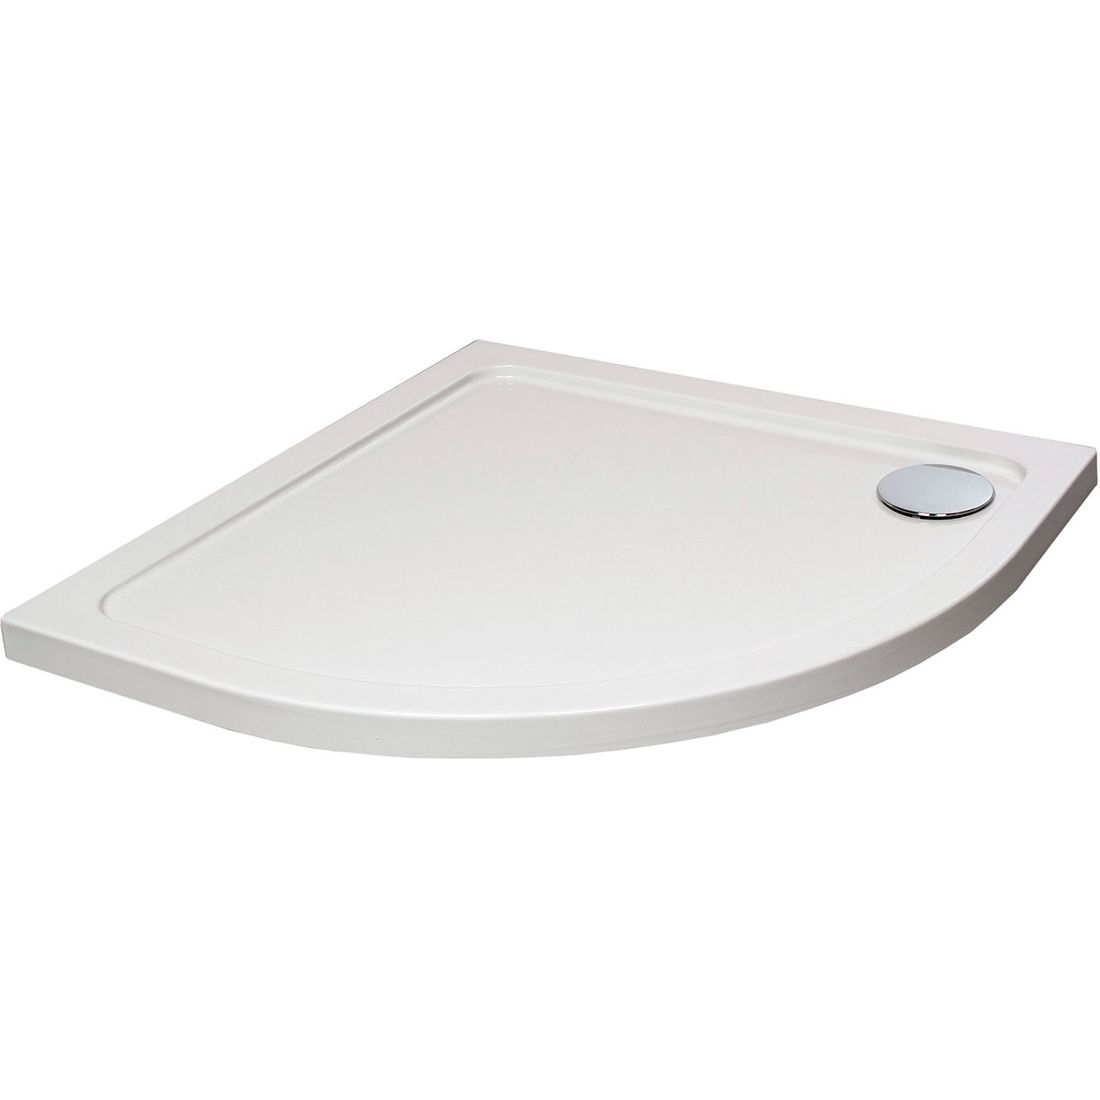 Shower Tray 900Mm Quadrant Low Profile Abs White